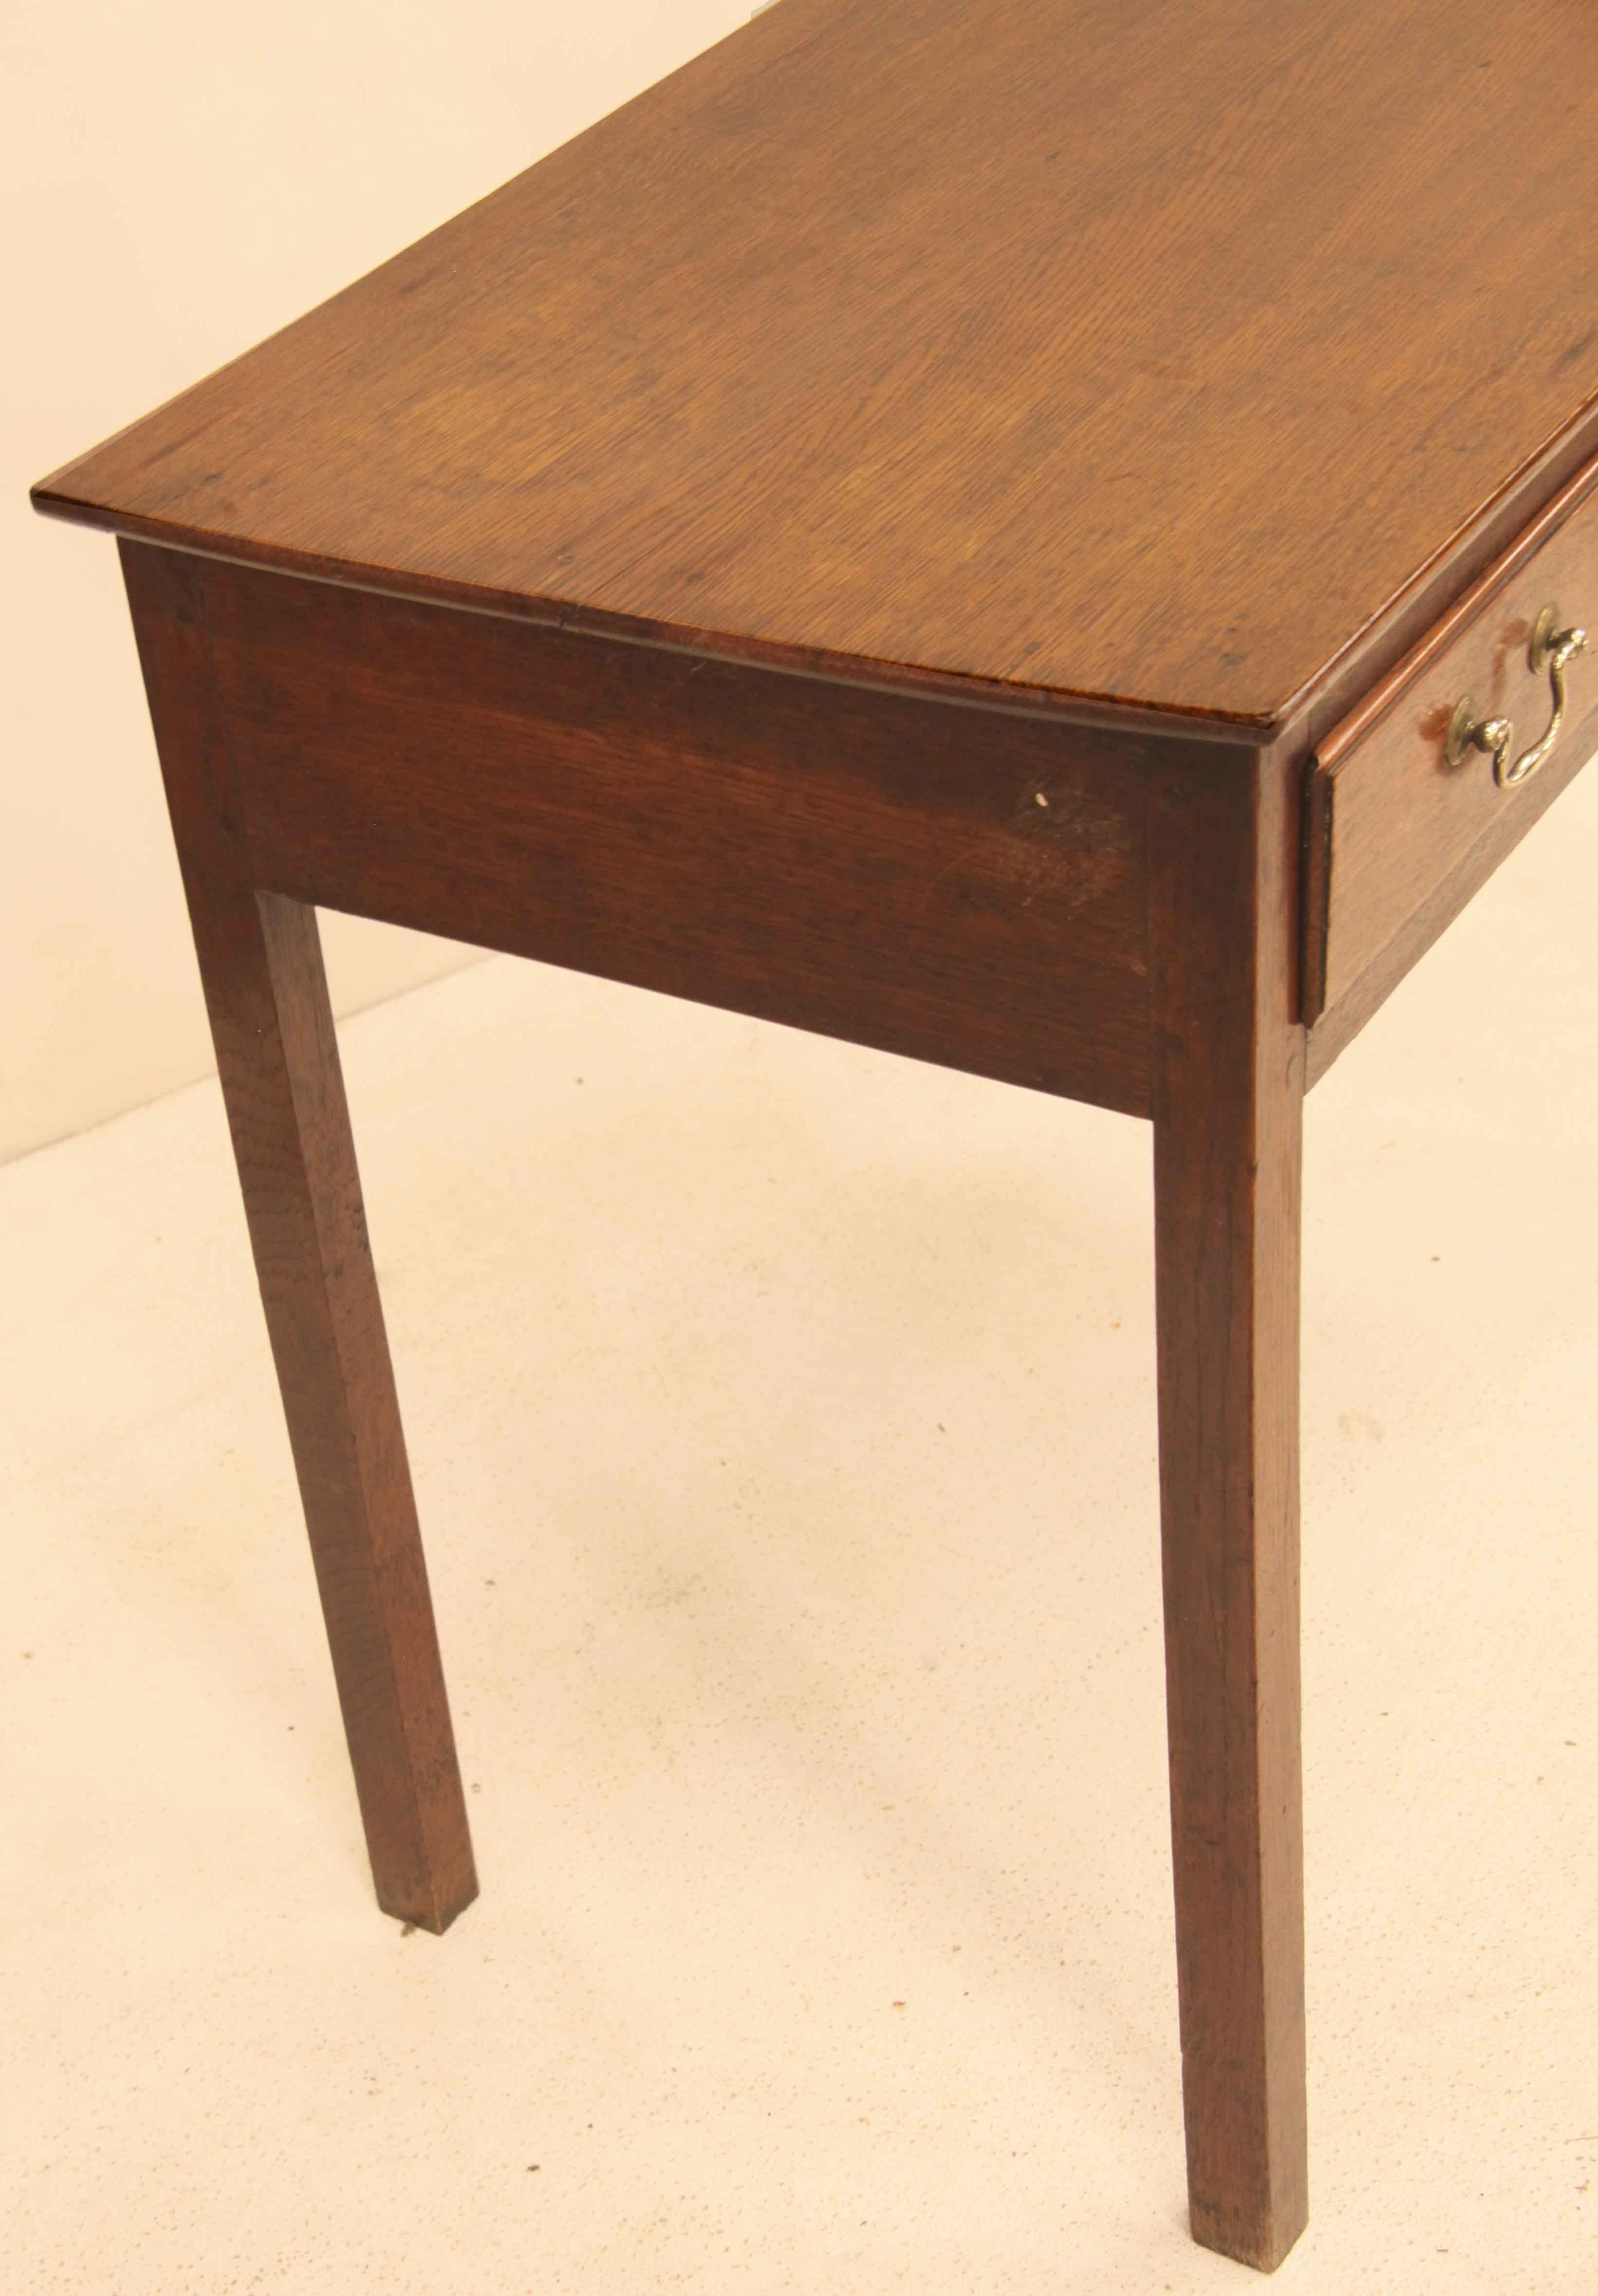 English oak one drawer side table,  the top has a straight edge around the sides and front, single drawer with overlapping molded edge, retaining the original swan neck brass pulls and escutcheon, secondary wood is oak. The straight legs are